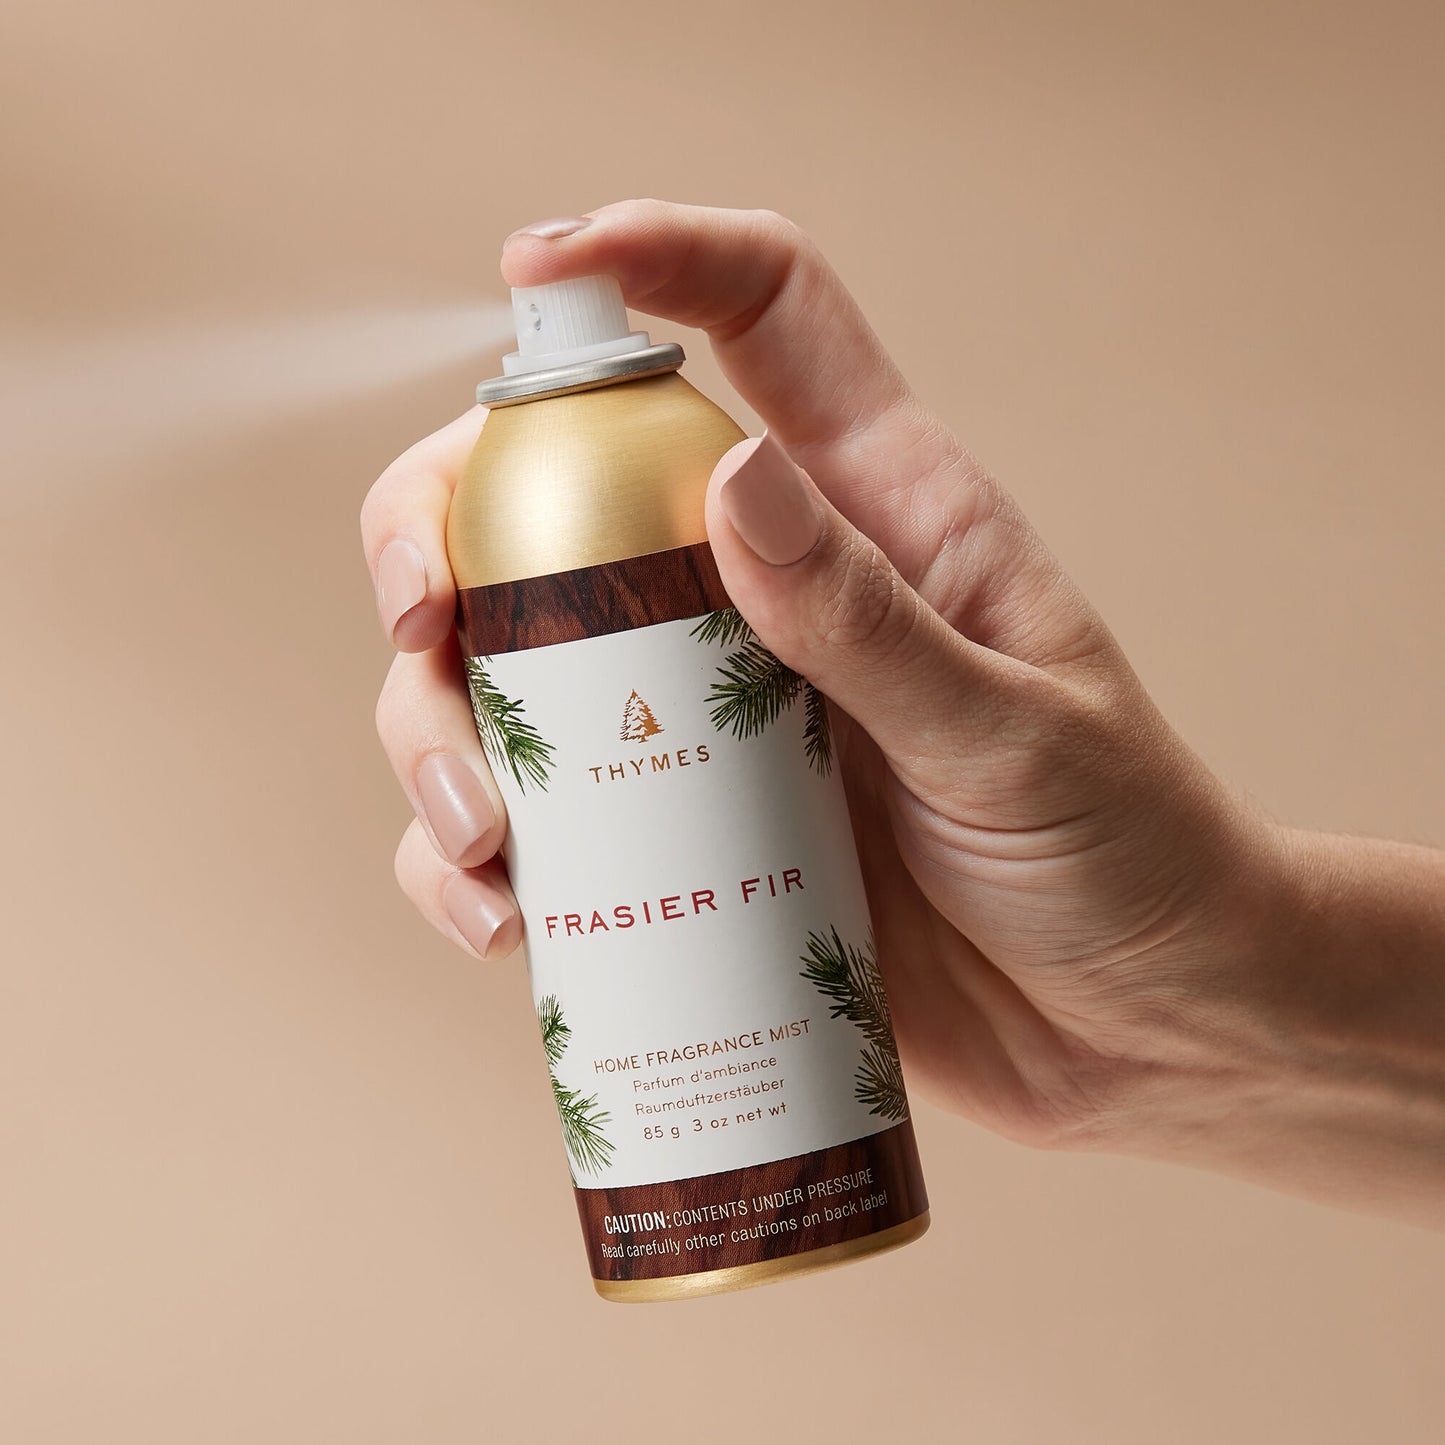 Thymes Frasier Fir Home Fragrance Mist-Frasier Fir-Thymes-The Village Shoppe, Women’s Fashion Boutique, Shop Online and In Store - Located in Muscle Shoals, AL.